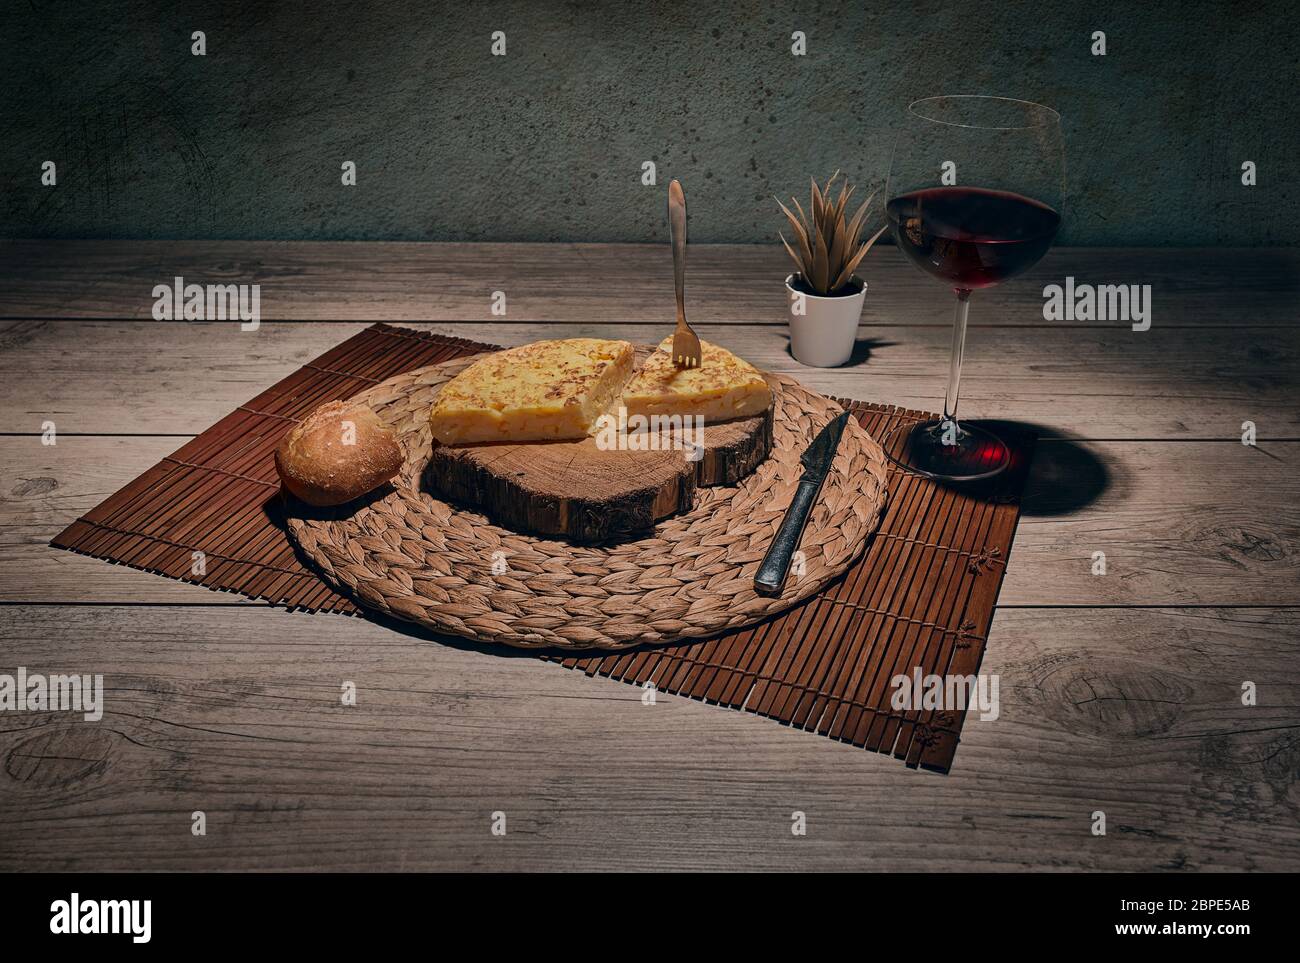 Spanish potato omelette on tablecloth with glass of wine Stock Photo